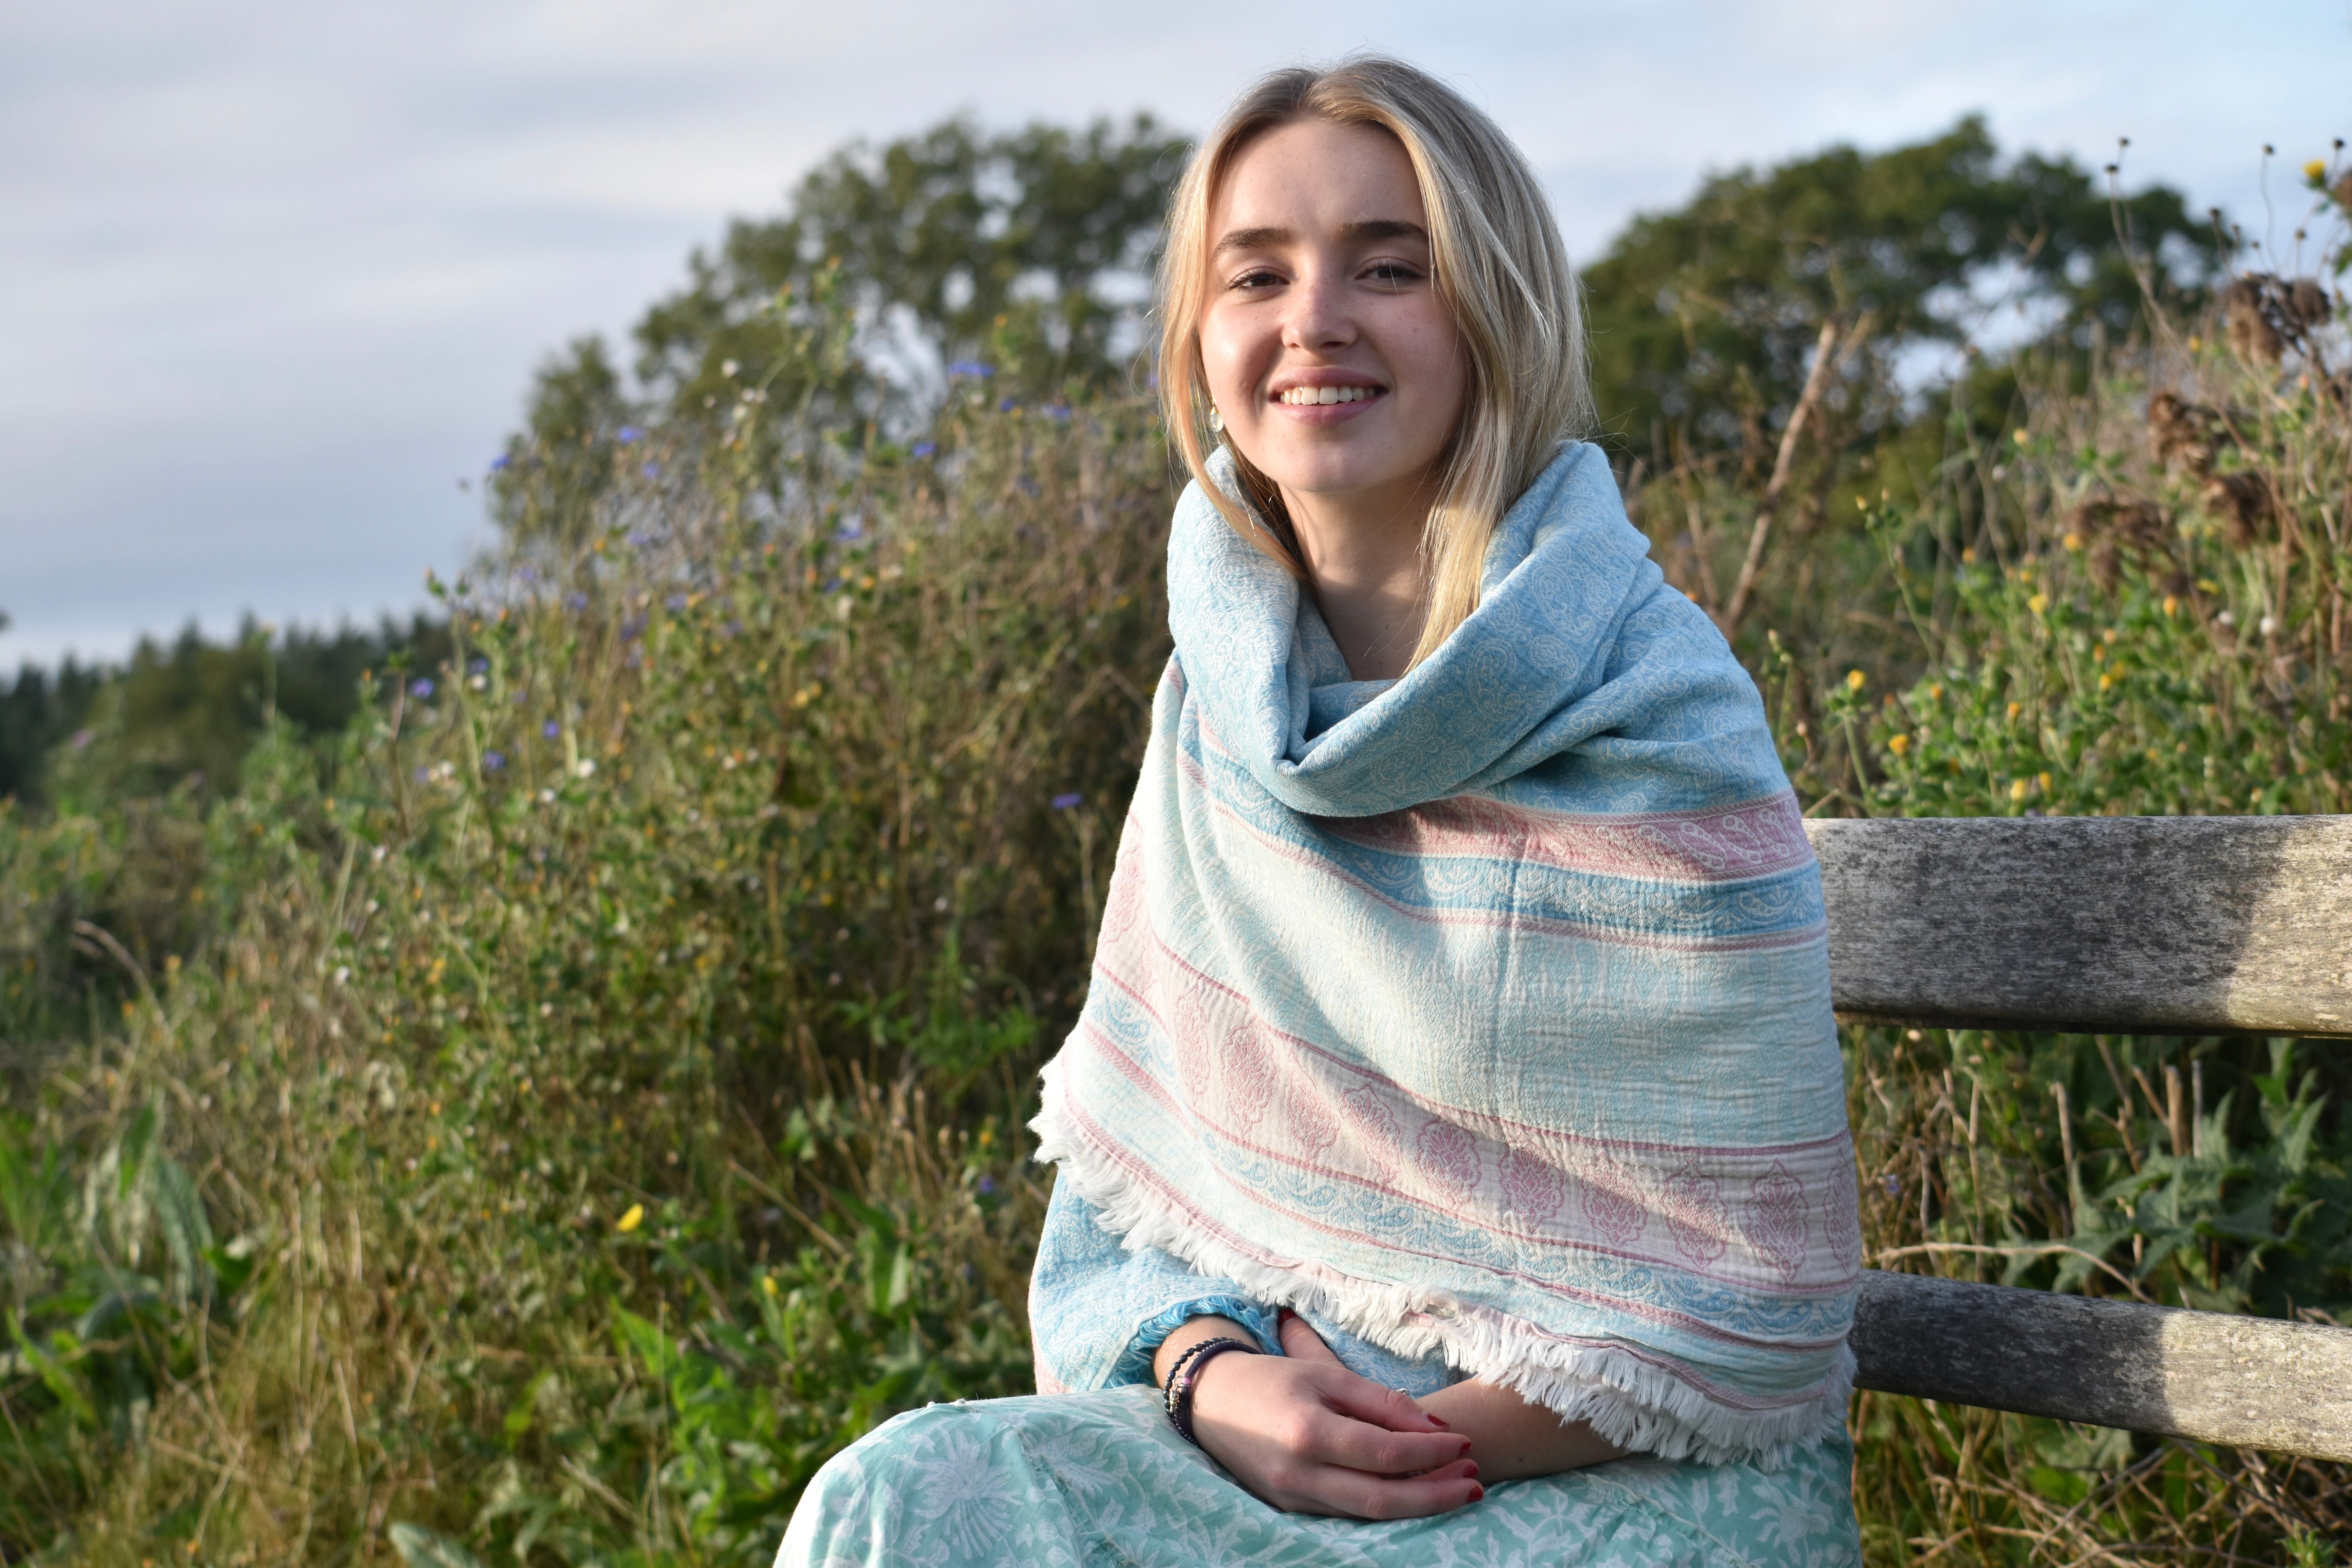 Hand Woven Beach Wrap - Turquoise and Pink